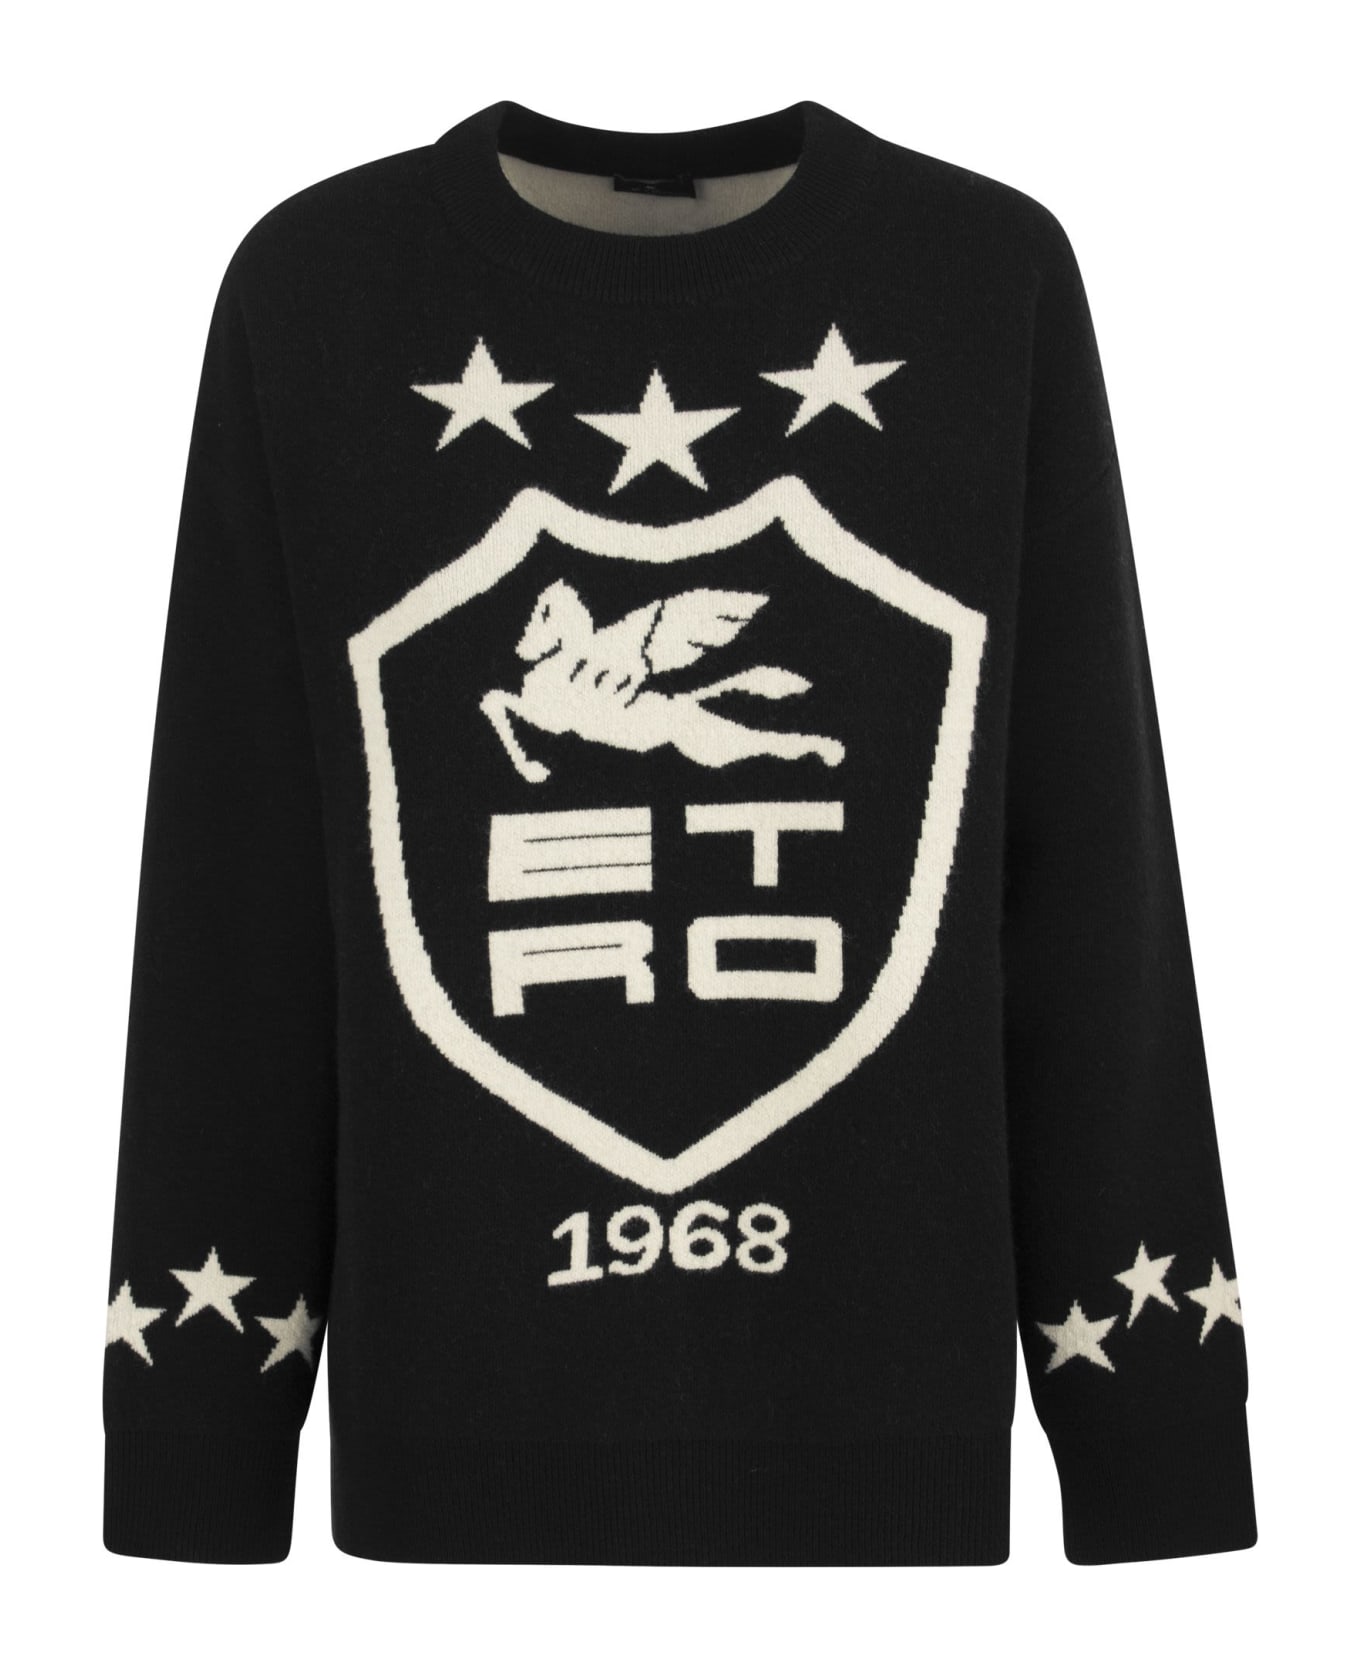 Etro Jacquard Jersey With Heraldic Coat Of Arms - Black